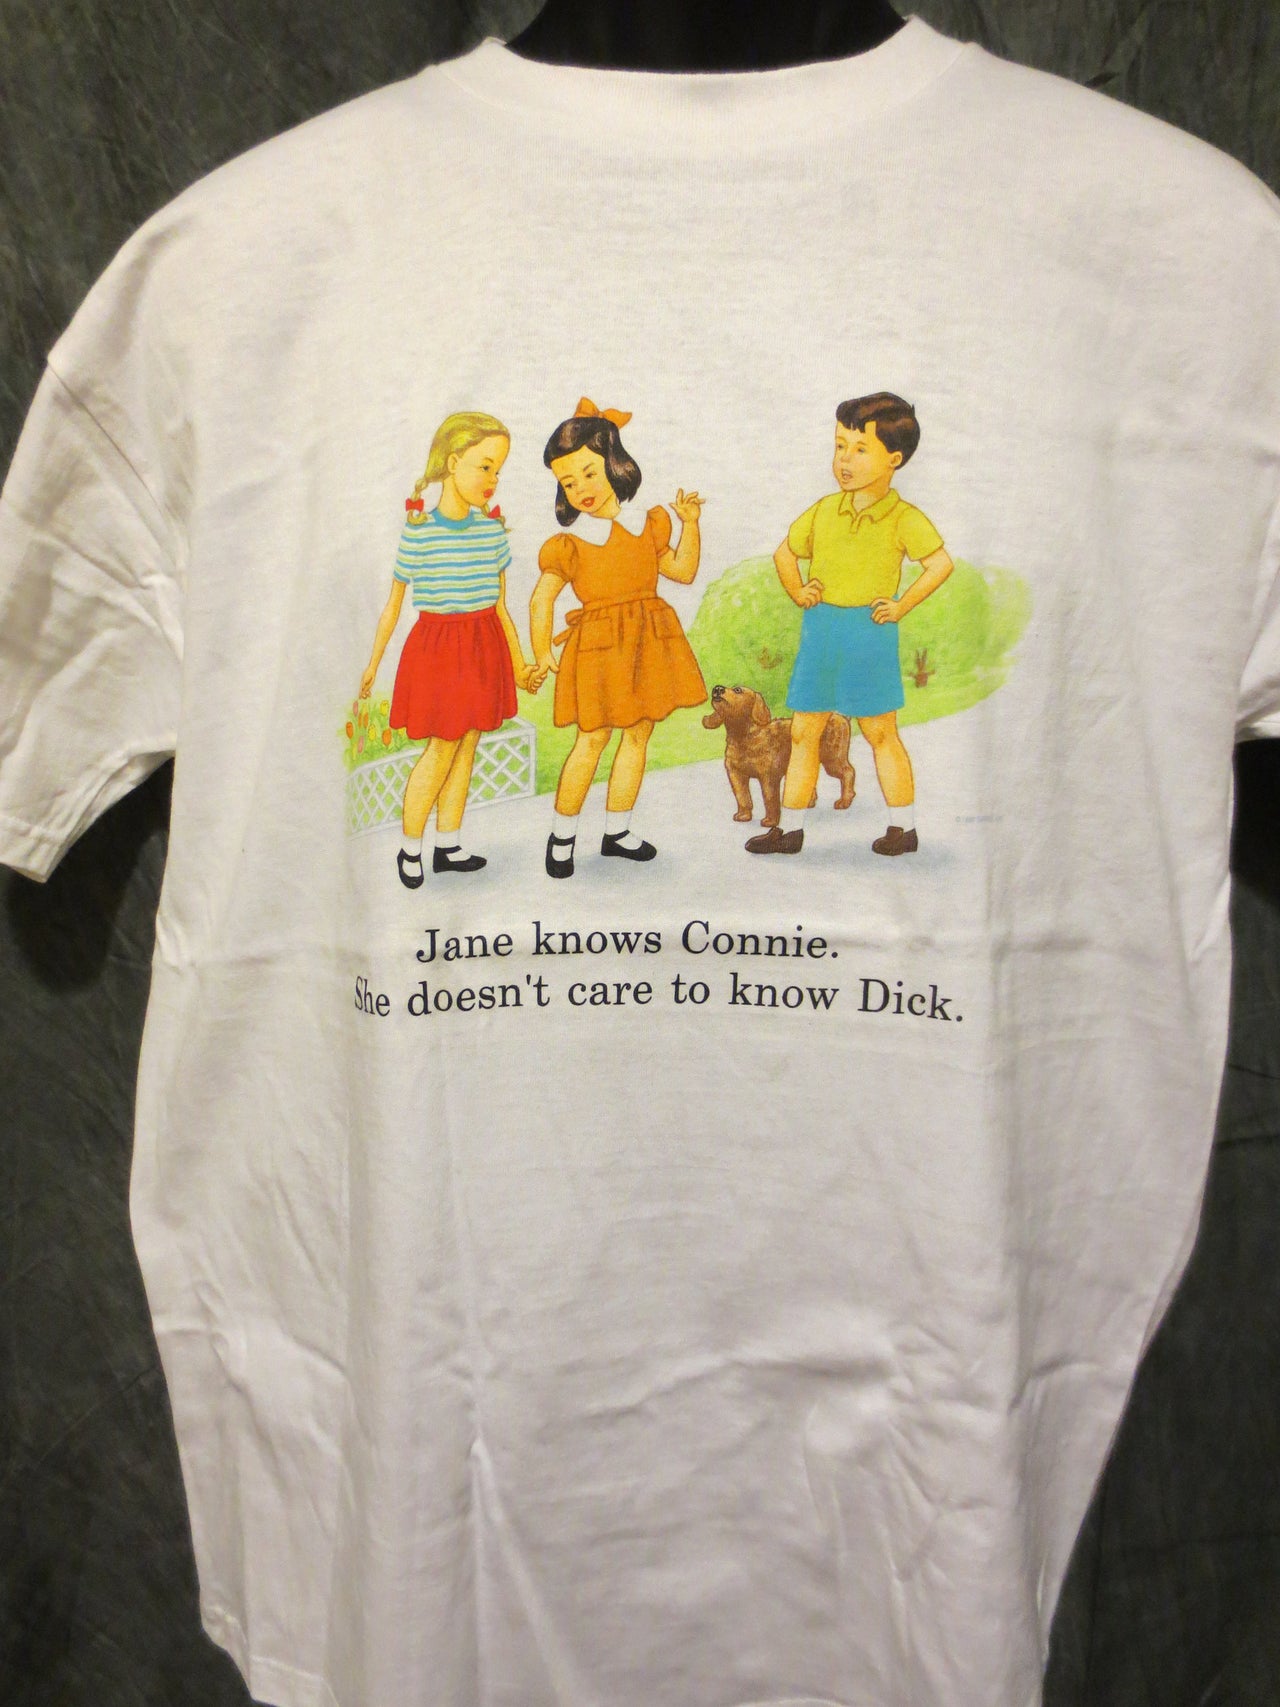 Childhood Jane Knows Connie She Doesn't Care to Know Dick Tshirt - TshirtNow.net - 5